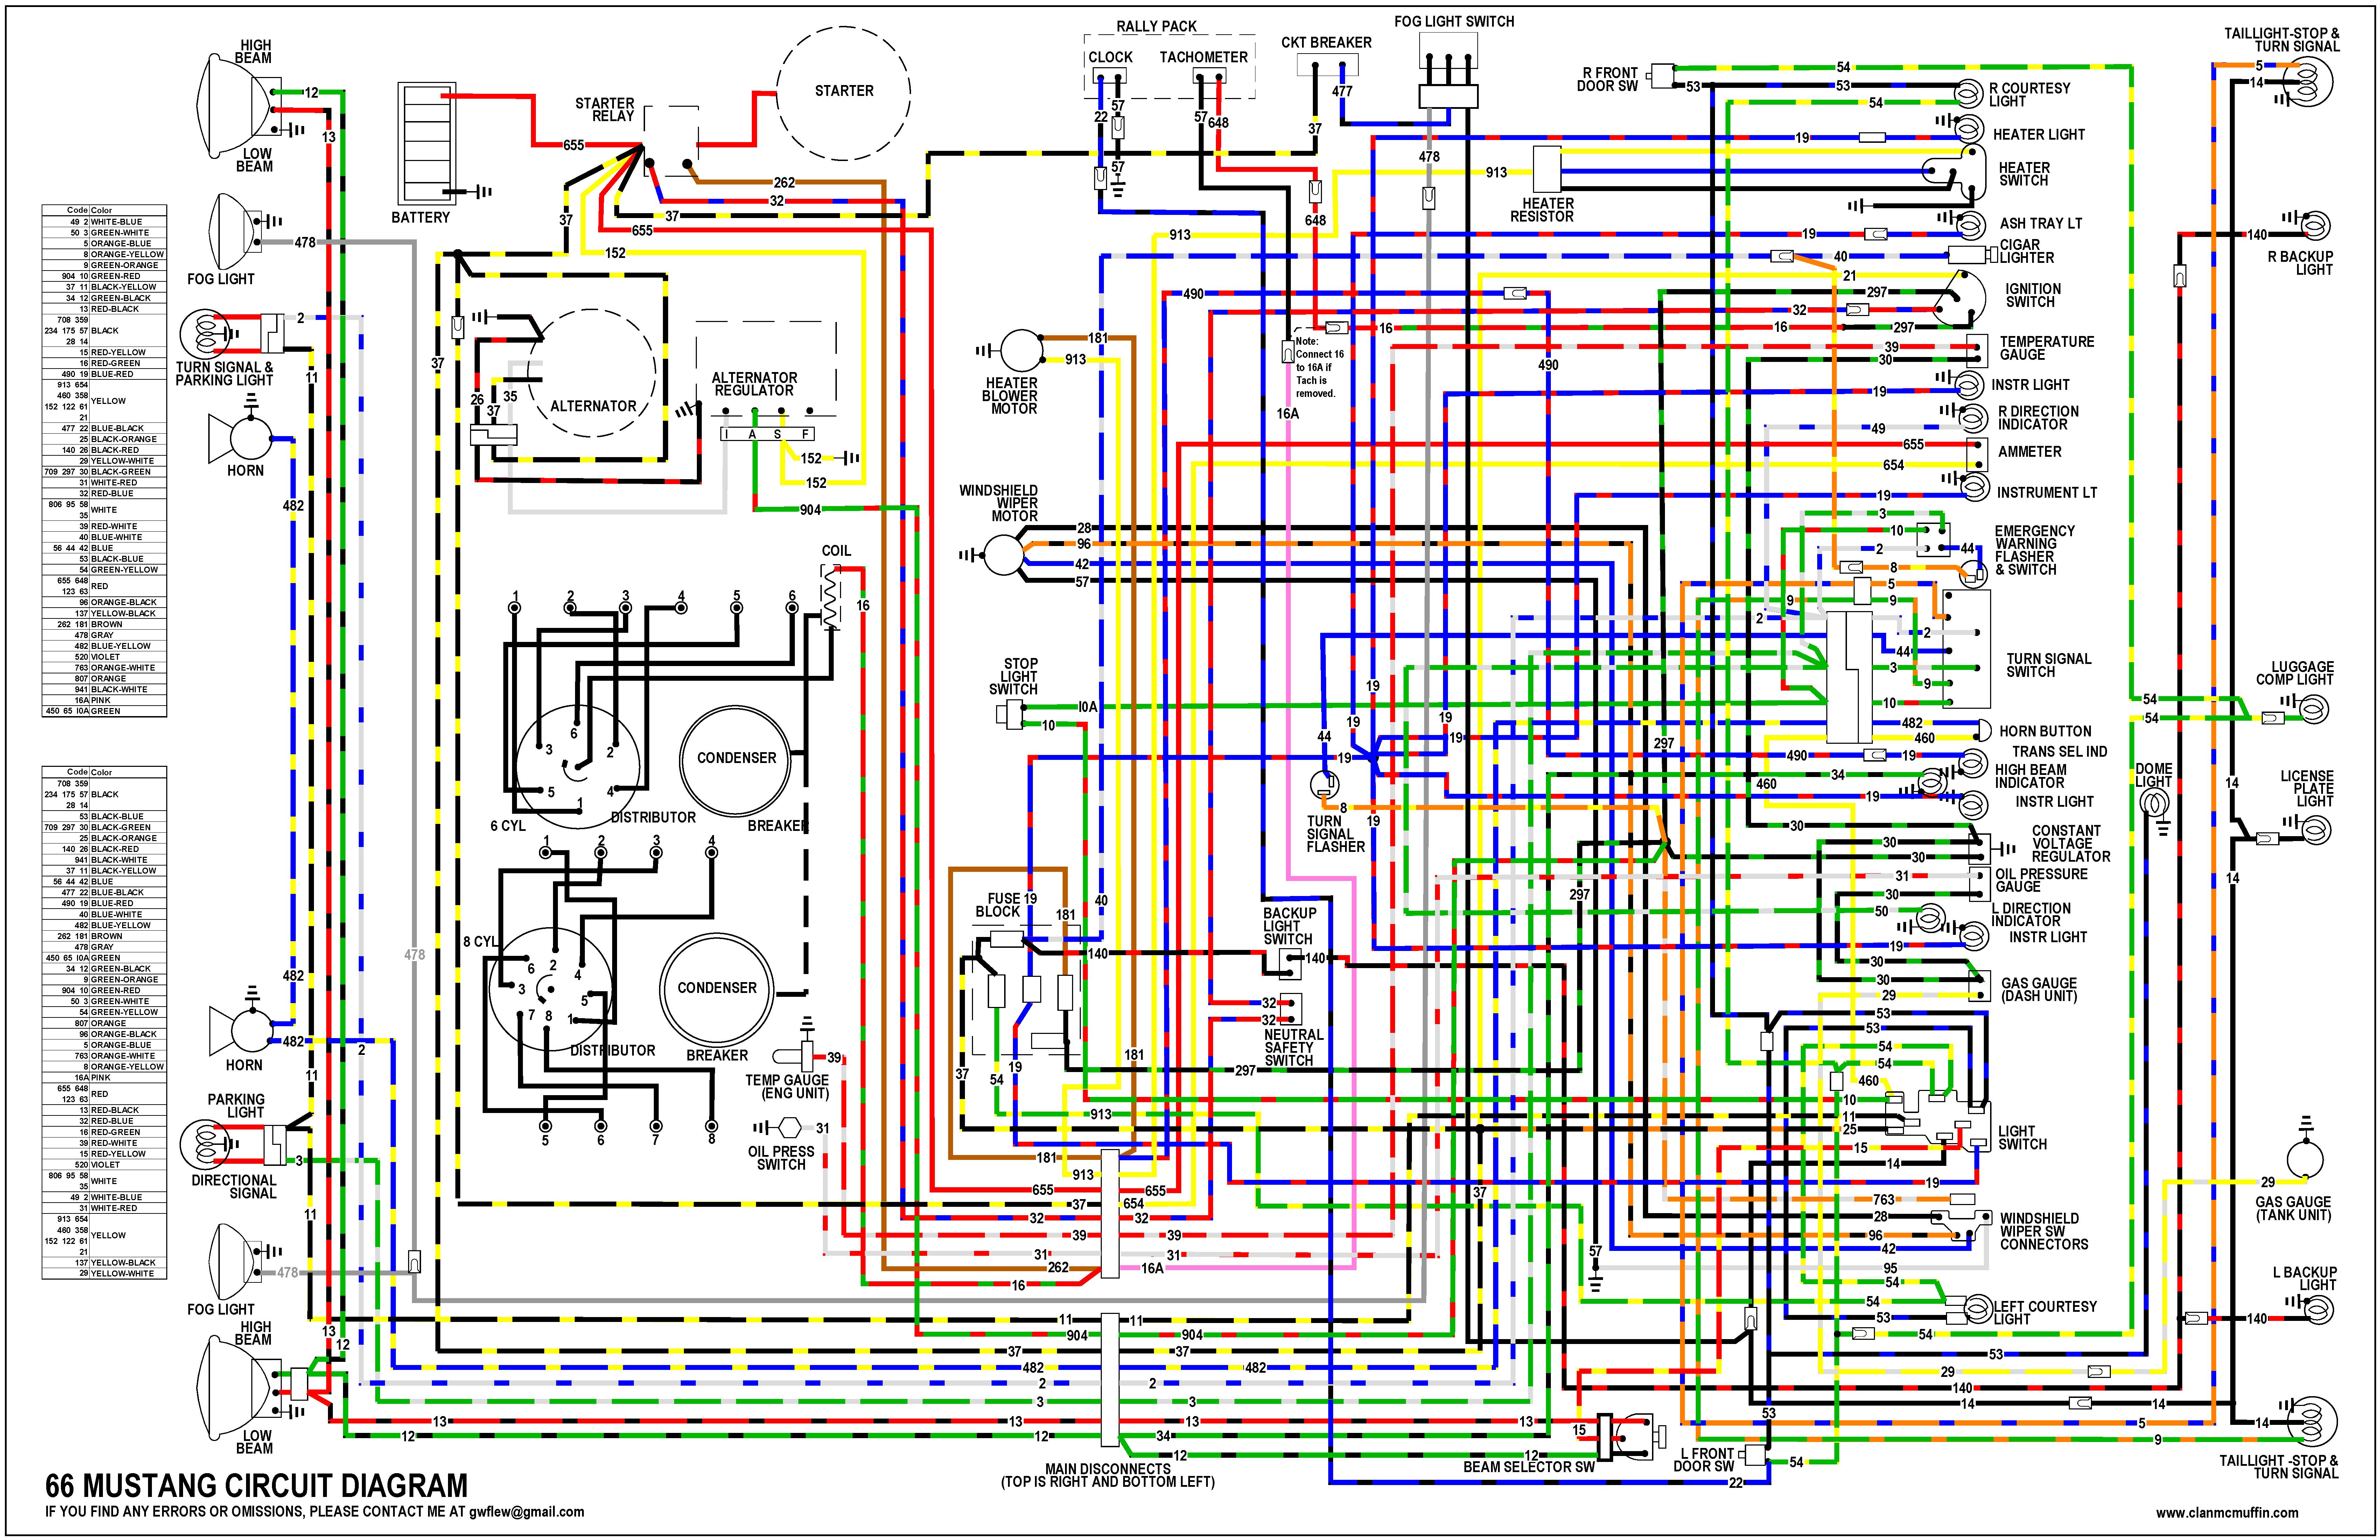 1965 Mustang Headlight Switch Wiring Diagram from www.clanmcmuffin.com